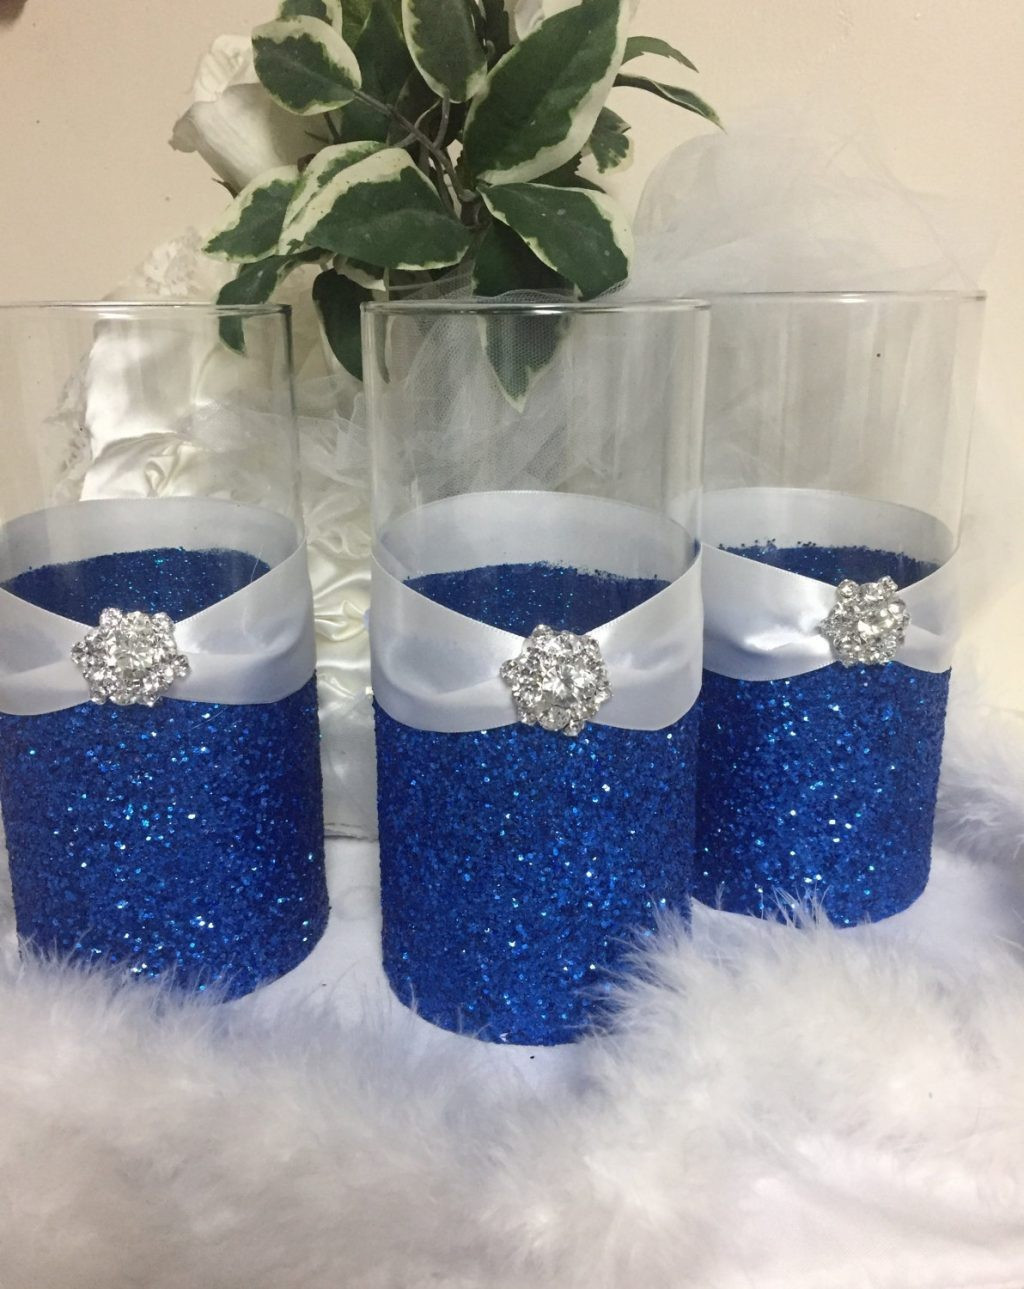 16 Unique Blue Floral Vase 2024 free download blue floral vase of wedding decorations centerpieces beautiful tallh vases glitter vase pertaining to wedding decorations centerpieces beautiful tallh vases glitter vase centerpiece diy vase